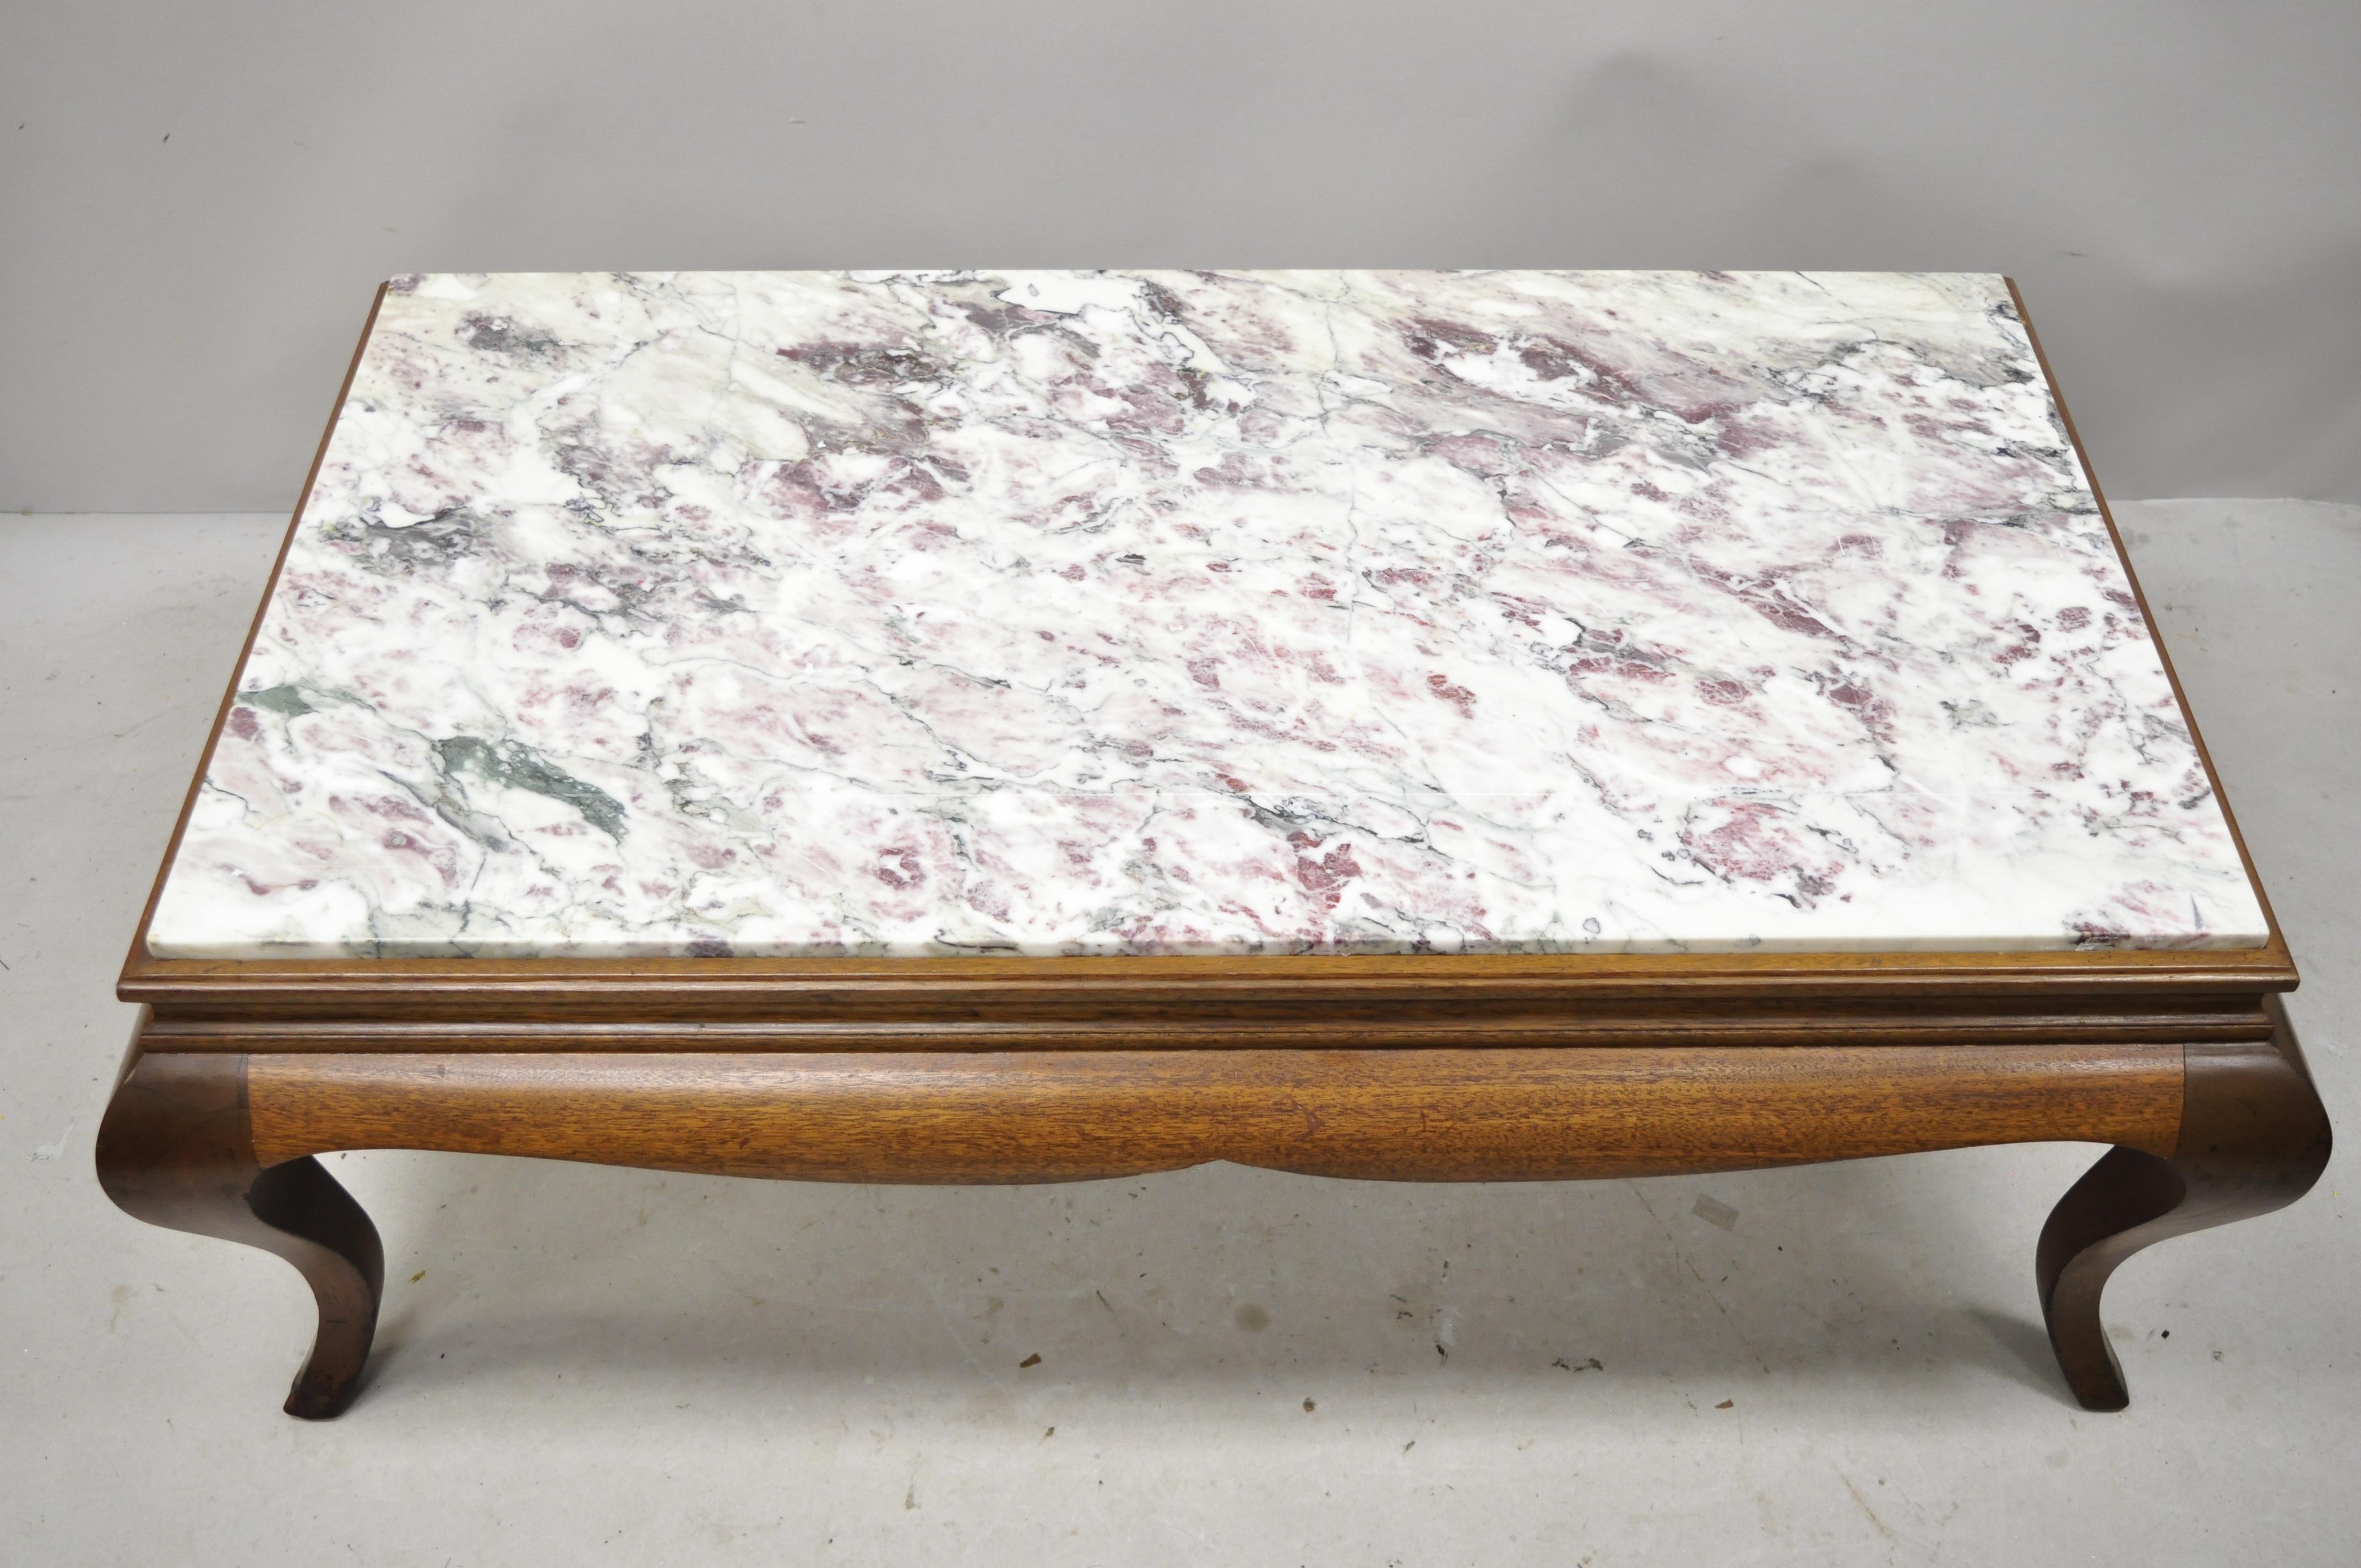 Early 20th century Georgian Hollywood Regency mahogany frame marble top coffee table. Item features a stunning marble top with pink and purple veins, solid wood frame, beautiful wood grain, shapely cabriole legs, quality american craftsmanship,